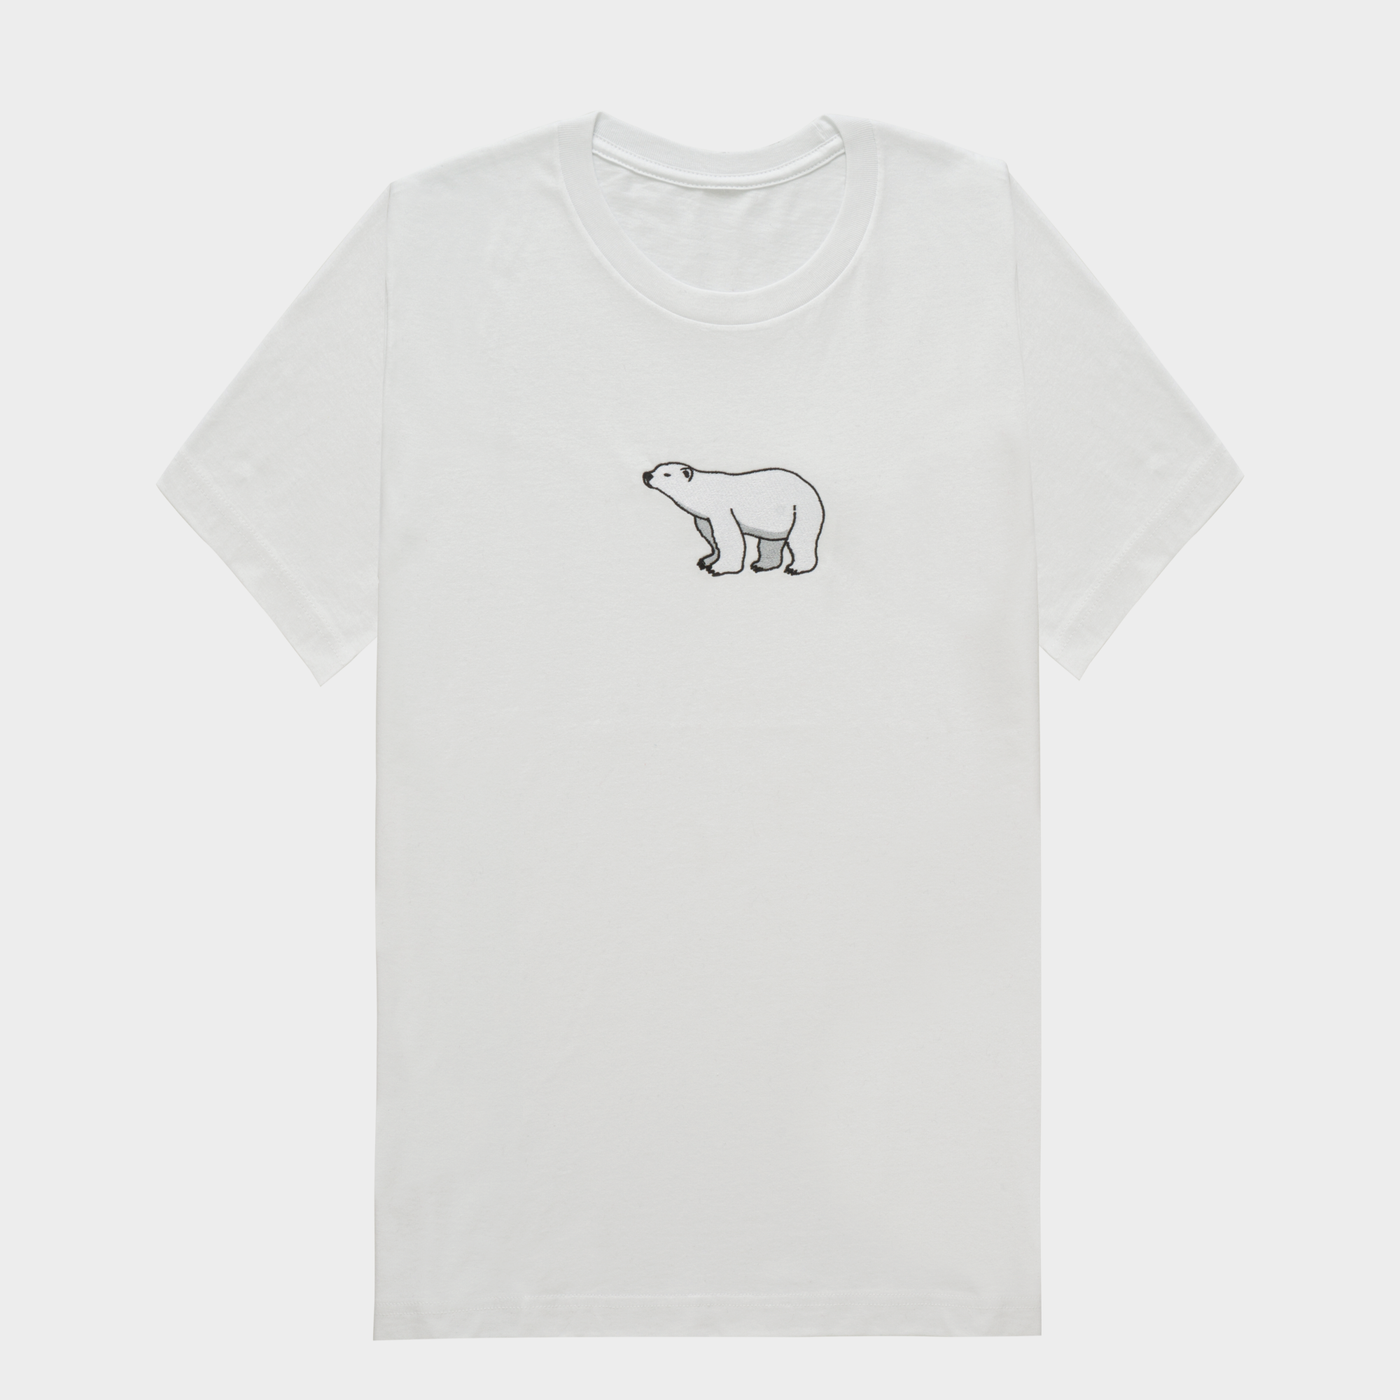 Bobby's Planet Women's Embroidered Polar Bear T-Shirt from Arctic Polar Animals Collection in White Color#color_white